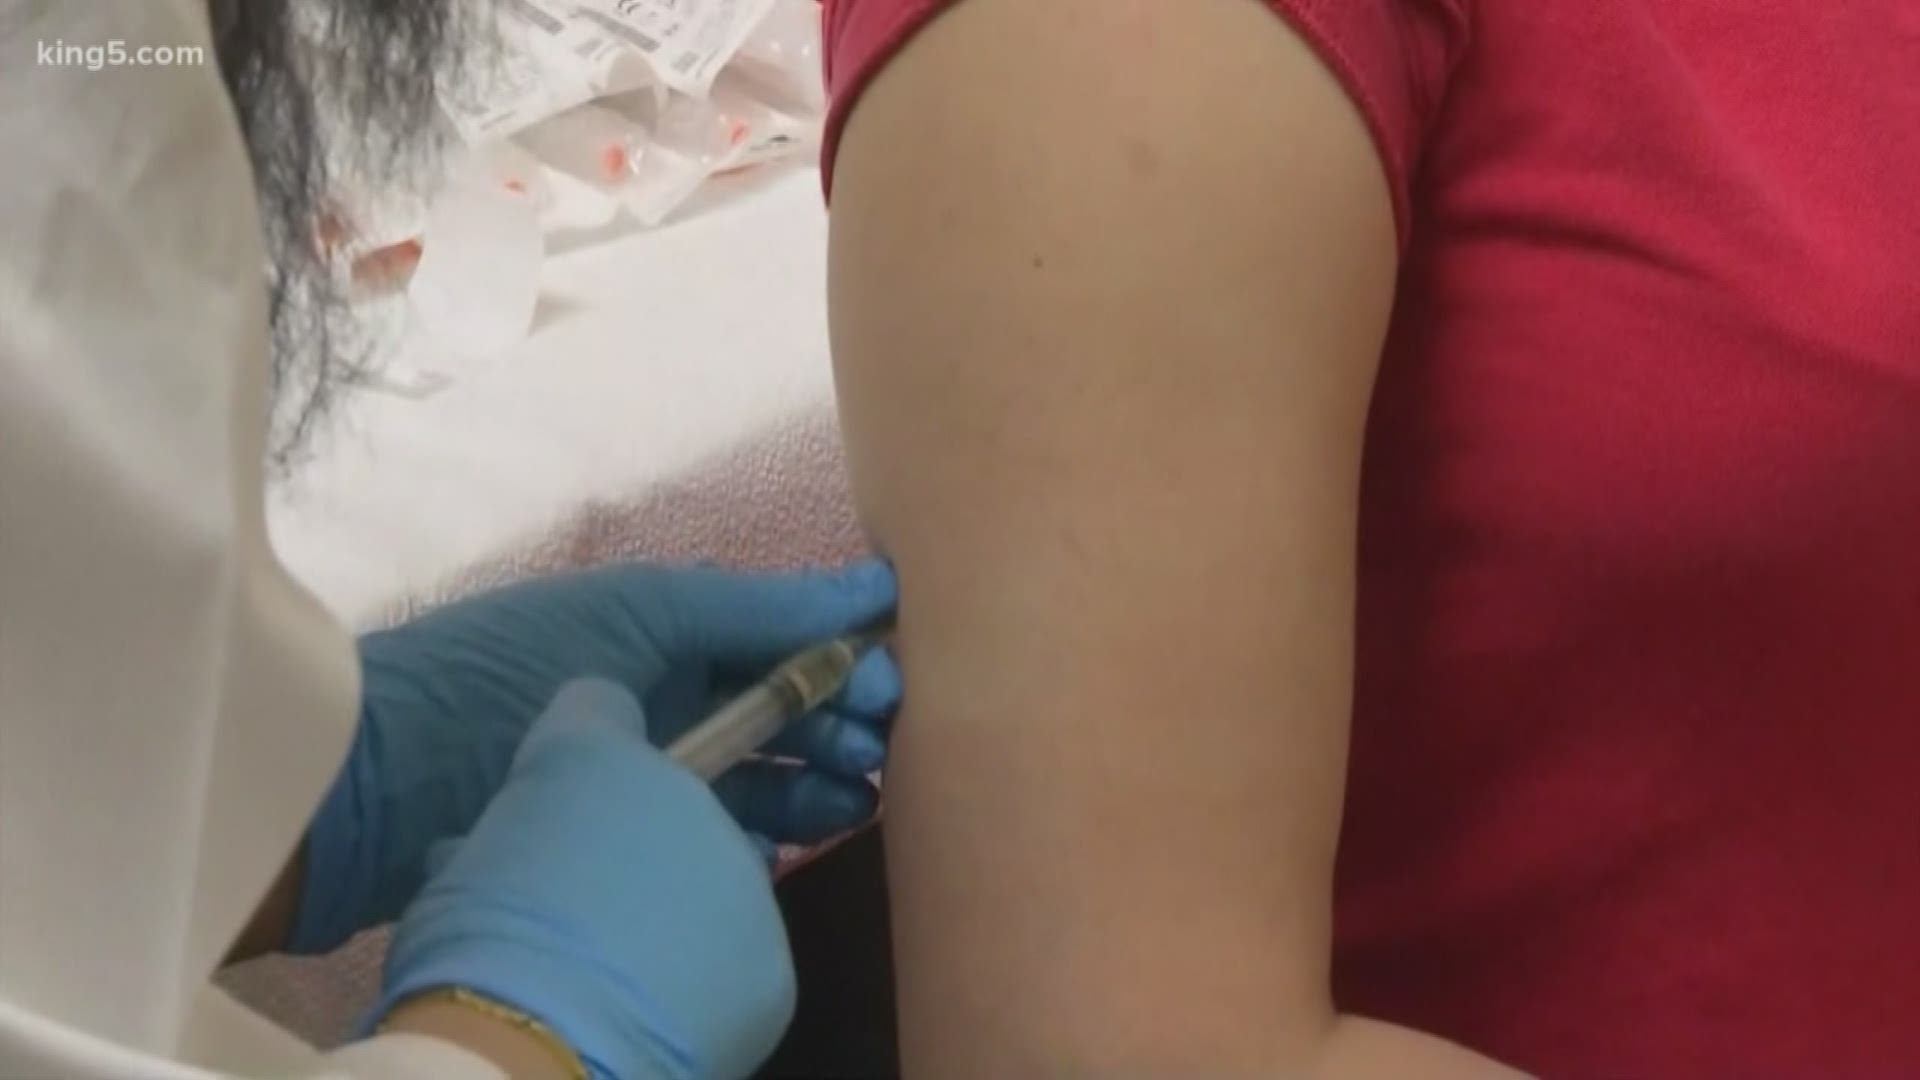 Measles caused more than 2-million deaths world wide before the vaccine became available in the 1960's. In Healthlink, KING 5's Amity Addrisi explains how to protect yourself and what happens if you aren't vaccinated.